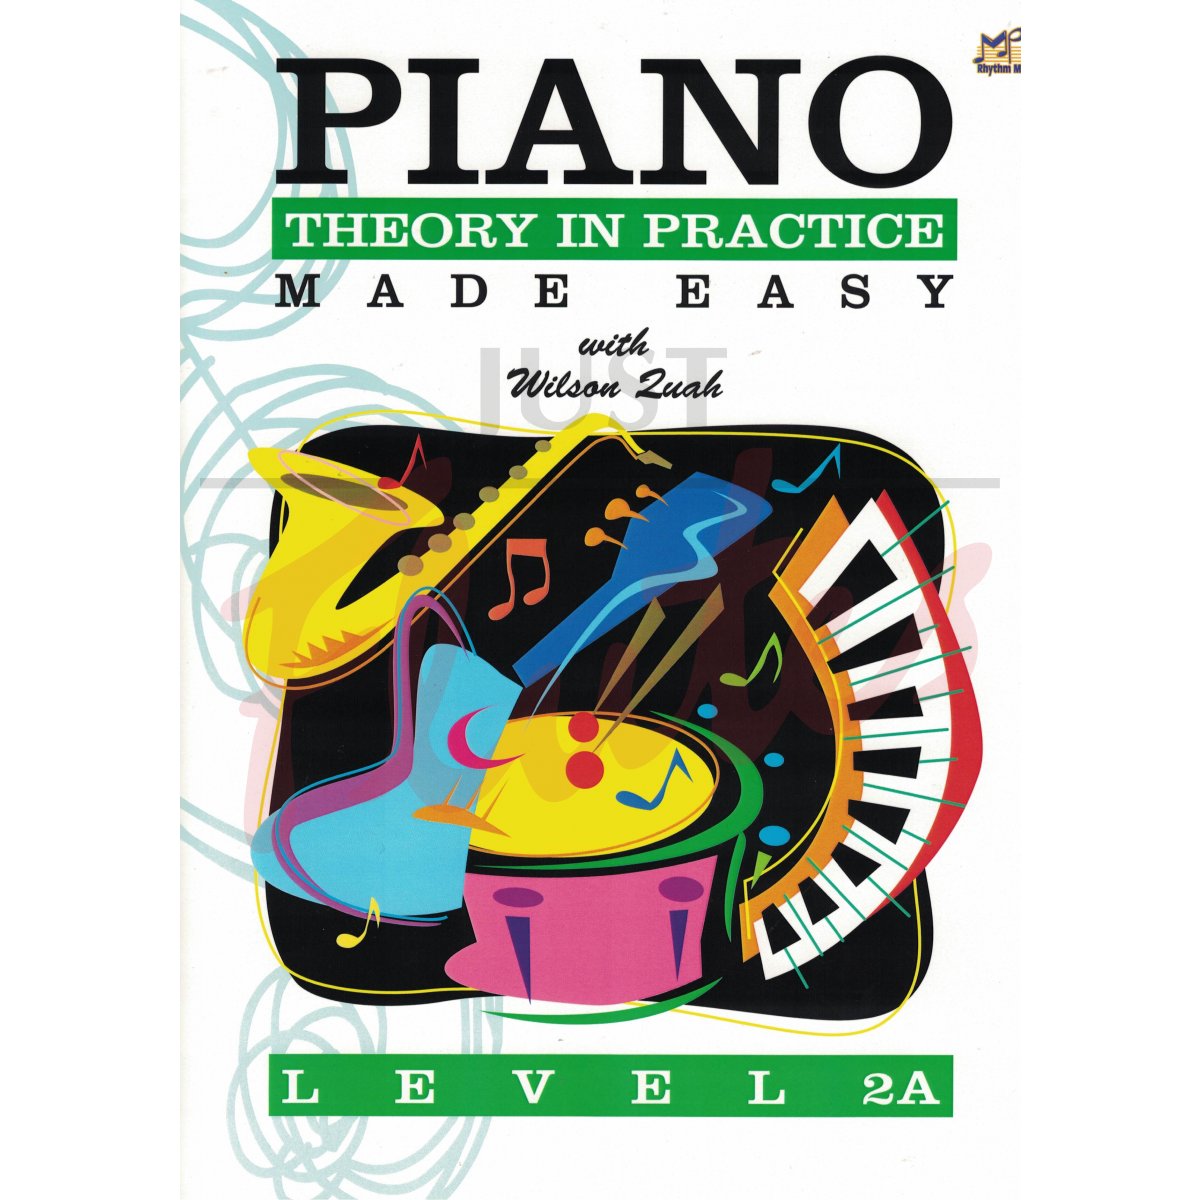 Piano Theory In Practice Made Easy Level 2A